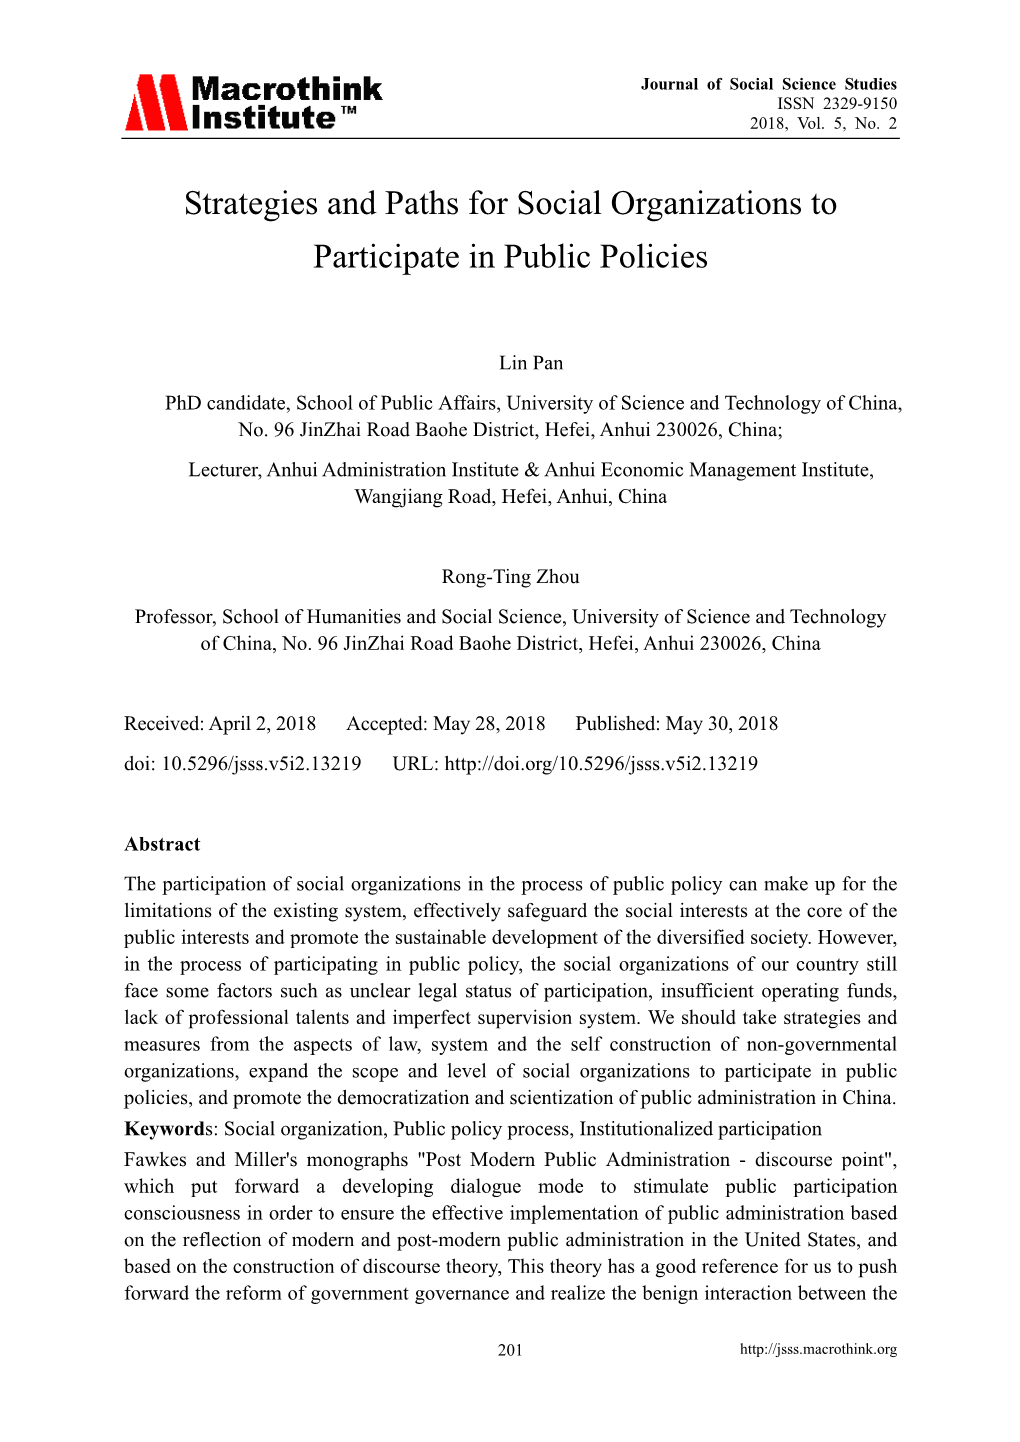 Strategies and Paths for Social Organizations to Participate in Public Policies